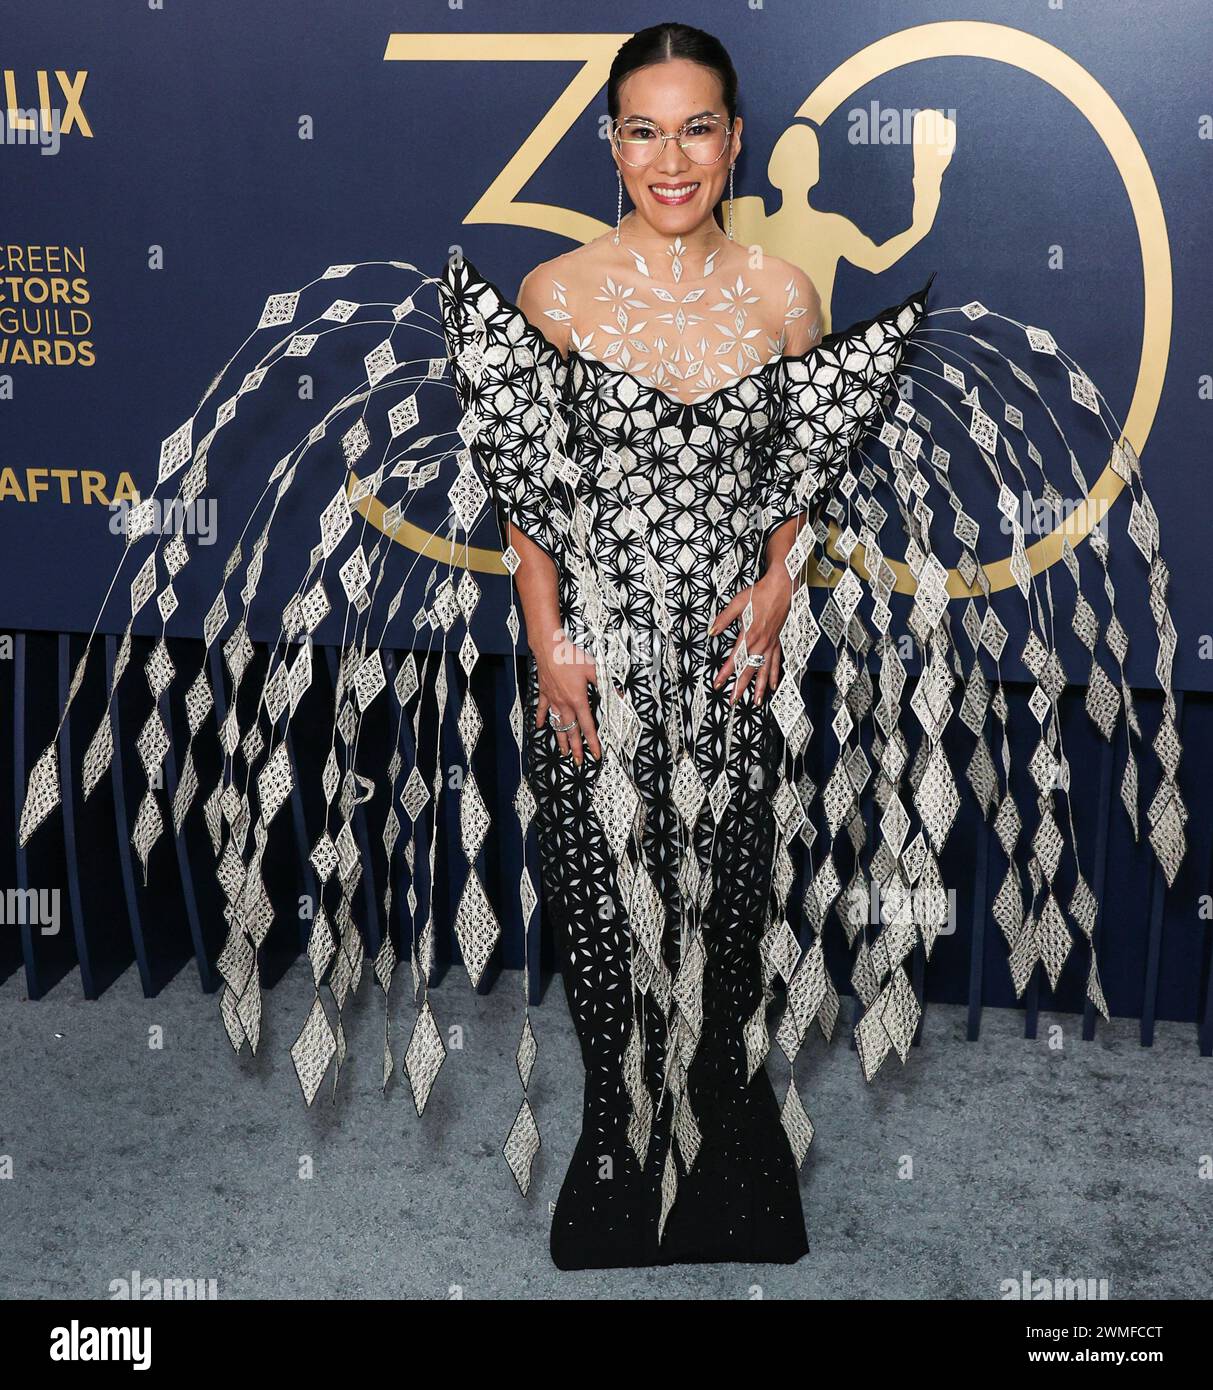 LOS ANGELES, CALIFORNIA, USA - FEBRUARY 24: Ali Wong wearing an Iris Van Herpen Couture dress and Brandon Blackwood shoes arrives at the 30th Annual Screen Actors Guild Awards held at the Shrine Auditorium and Expo Hall on February 24, 2024 in Los Angeles, California, United States. (Photo by Xavier Collin/Image Press Agency) Stock Photo